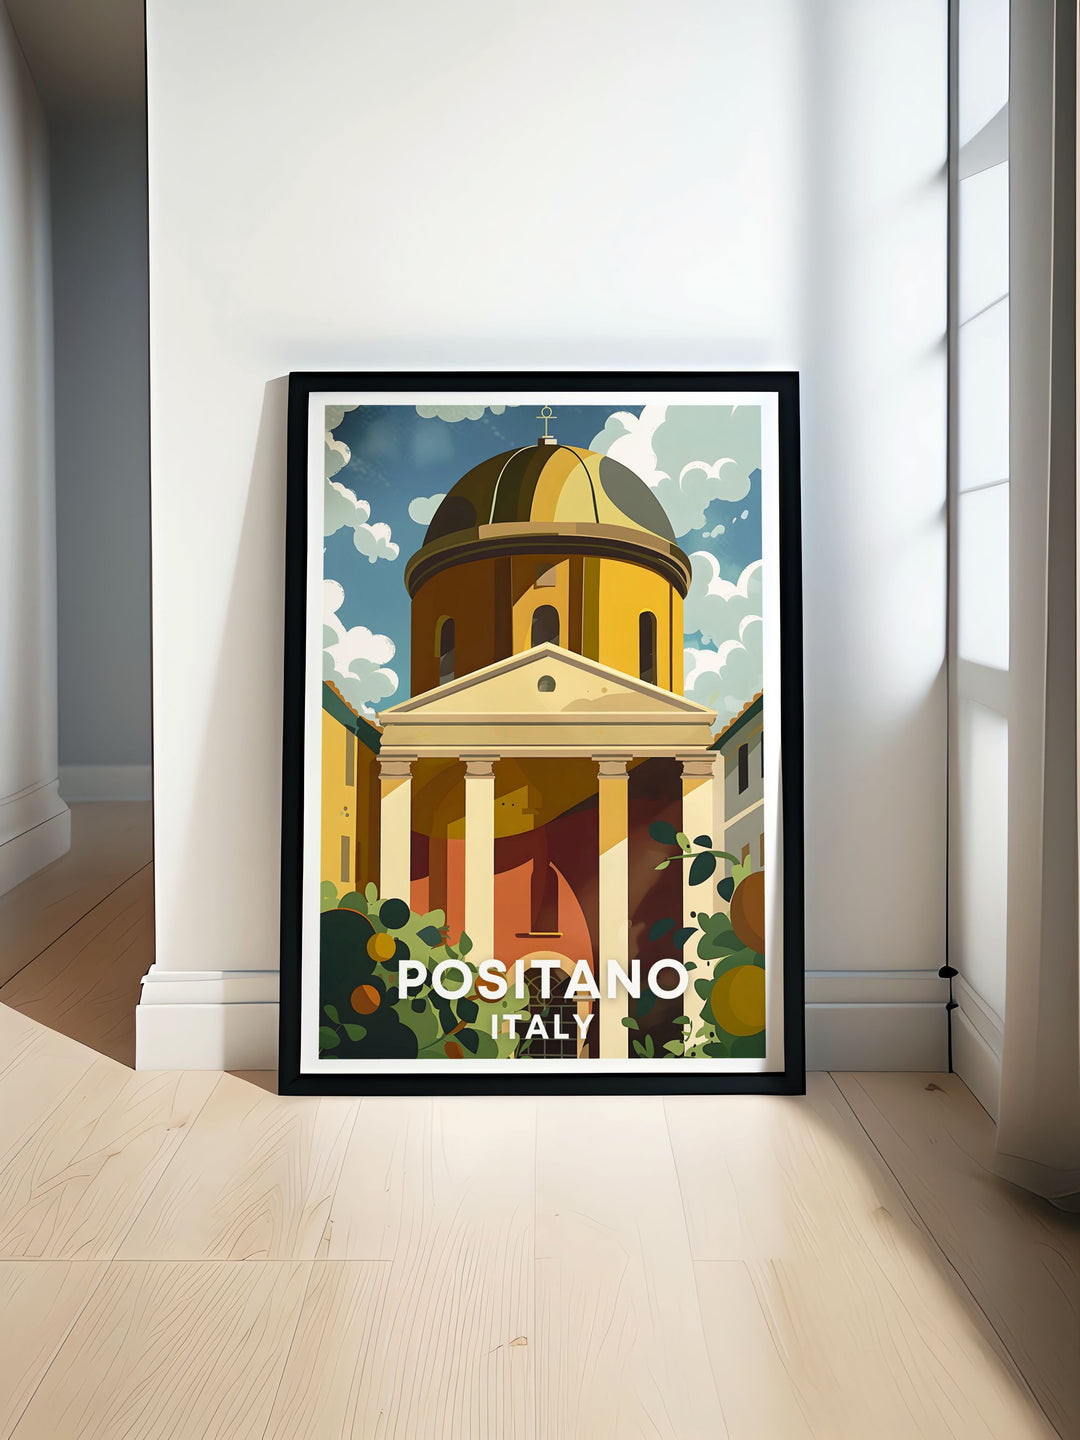 Positano Art Print featuring Spiaggia Grande and the iconic Chiesa di Santa Maria Assunta perfect for enhancing home decor with a touch of Italian elegance bringing the charm of the Amalfi Coast into your living space with vibrant colors and stunning details